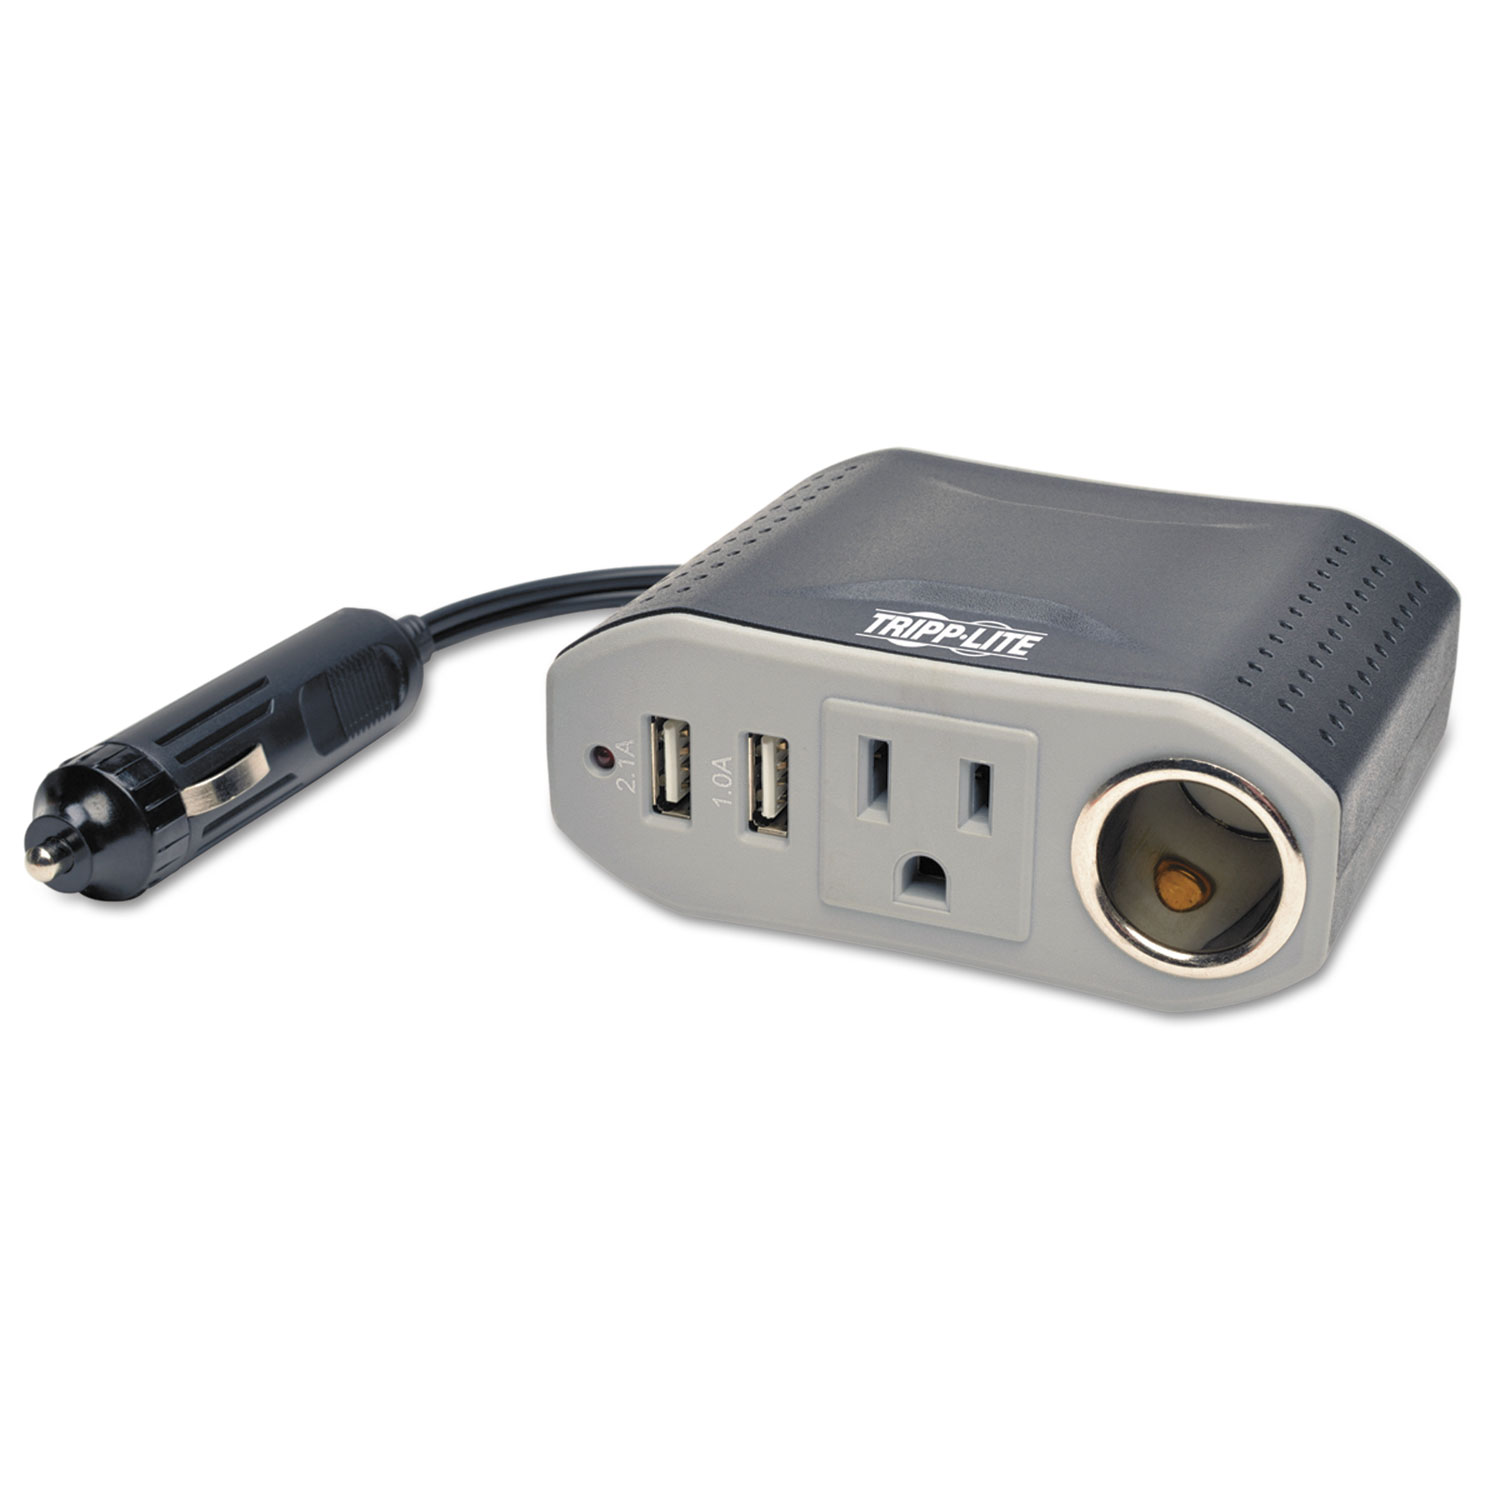 100W AC Inverter with USB Charging; 1 Outlet, 2 USB Ports, Silver